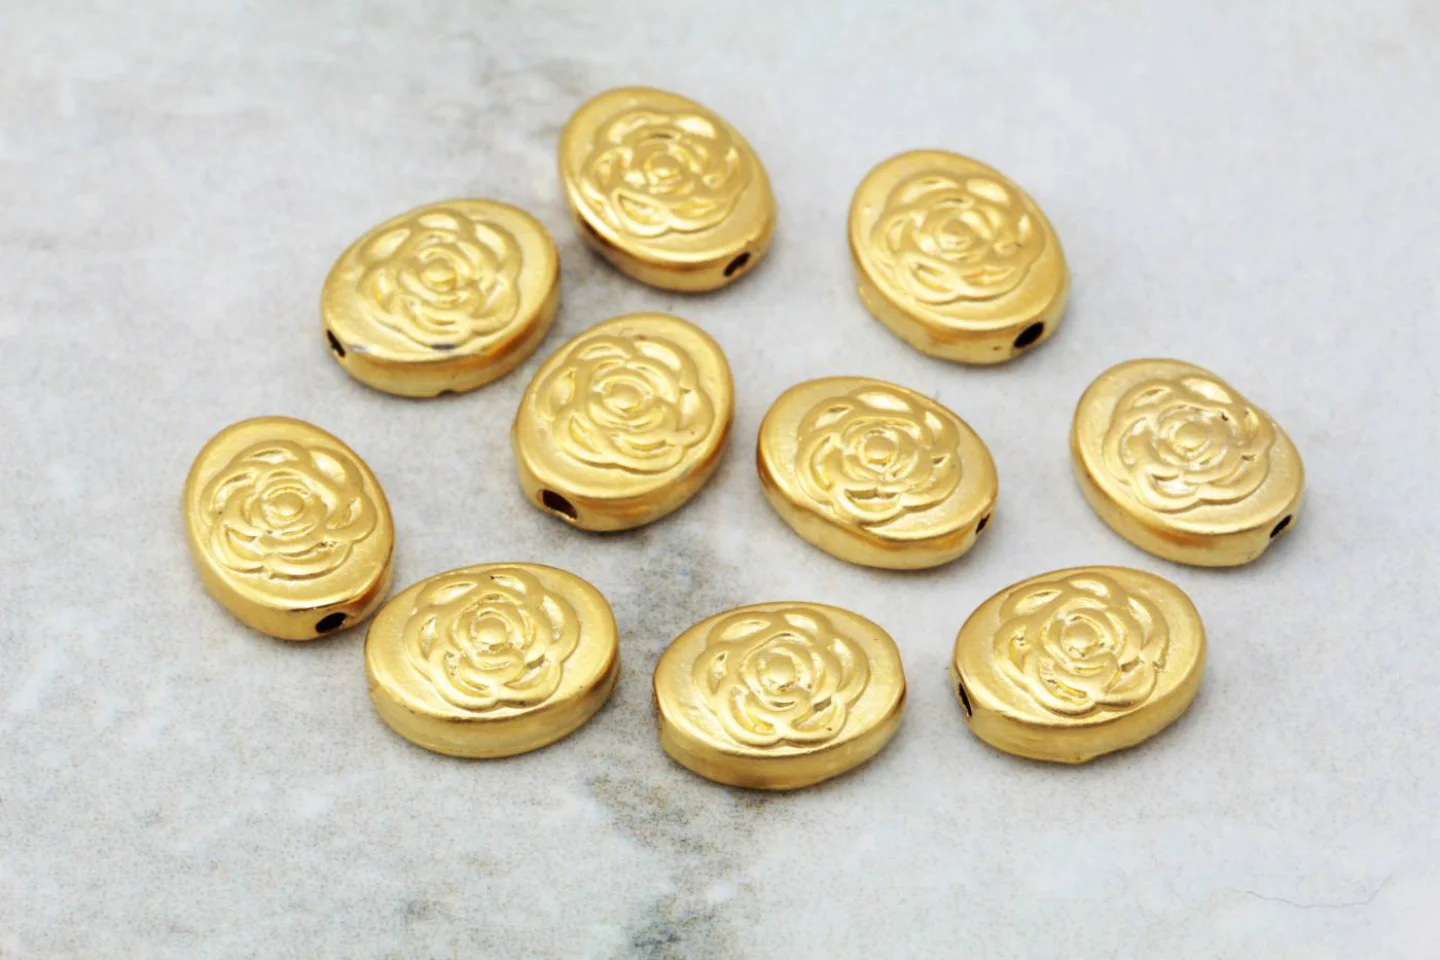 gold-plated-oval-rose-patterned-charms.